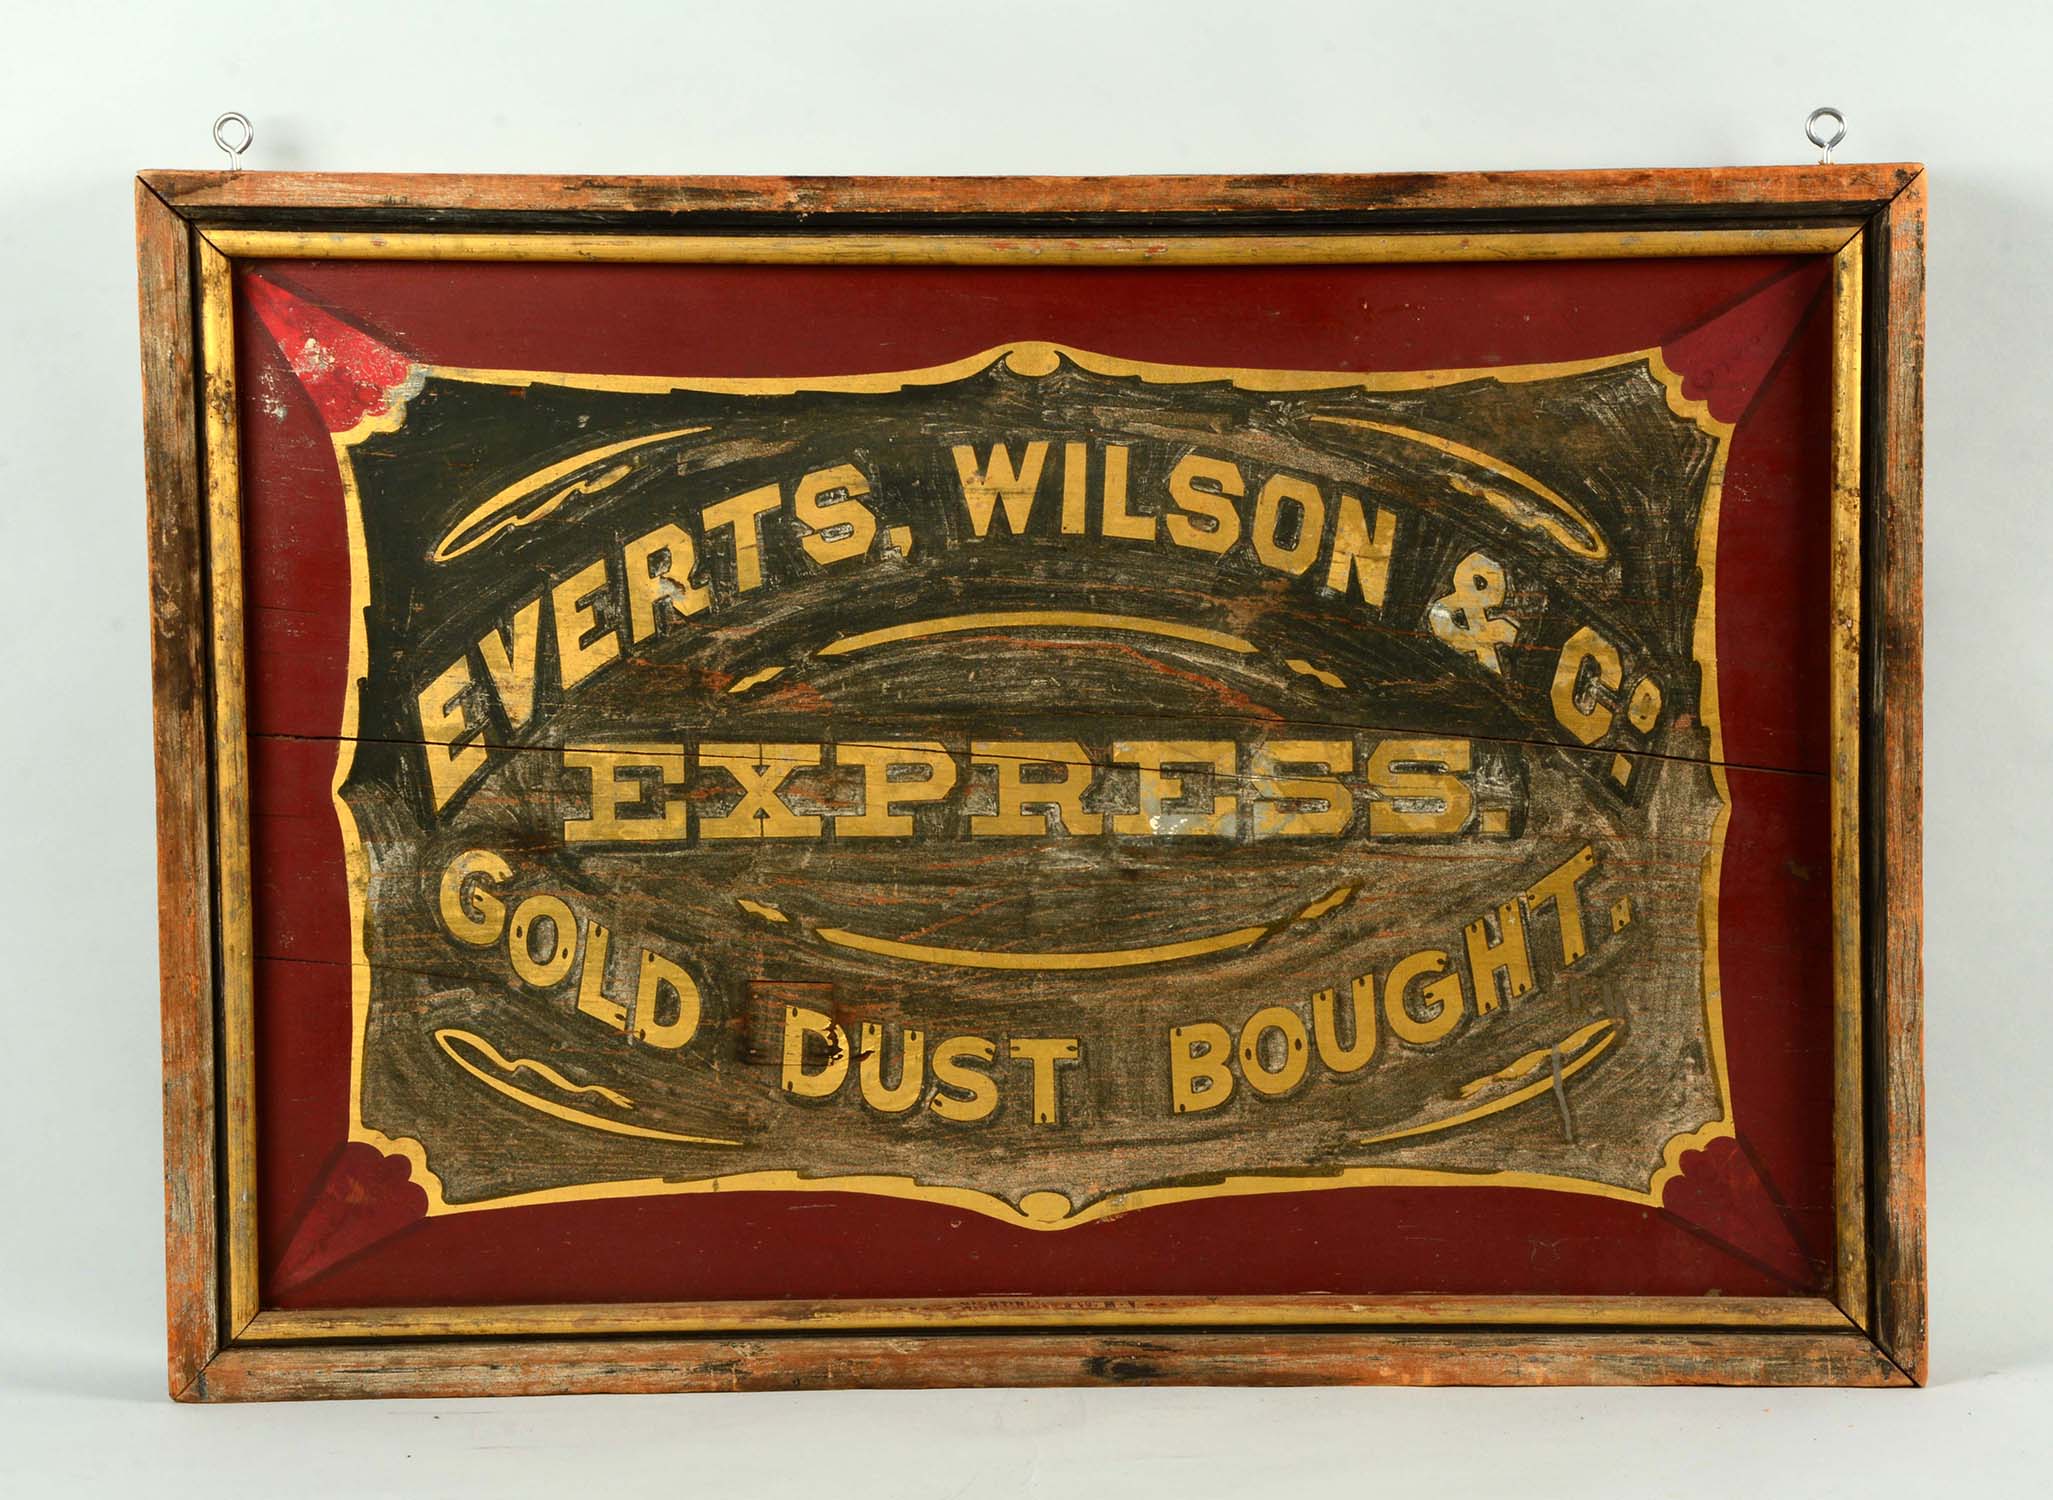 Everts, Wilson & Co. Gold Dust Advertising Sign, Estimated at $50,000-100,000.